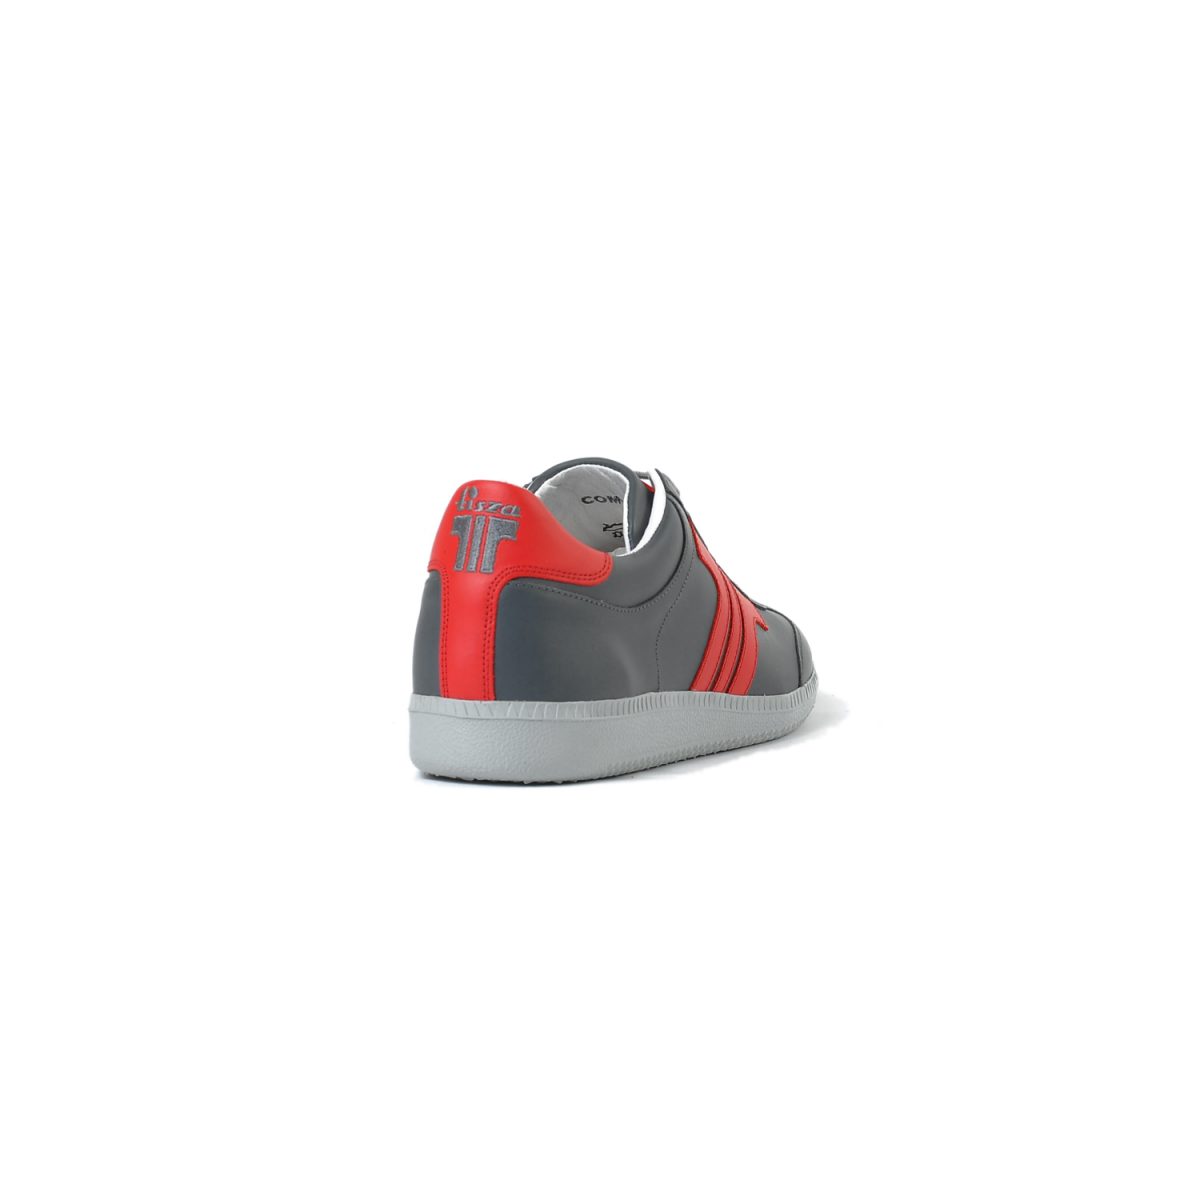 Tisza shoes - Compakt - Grey-red